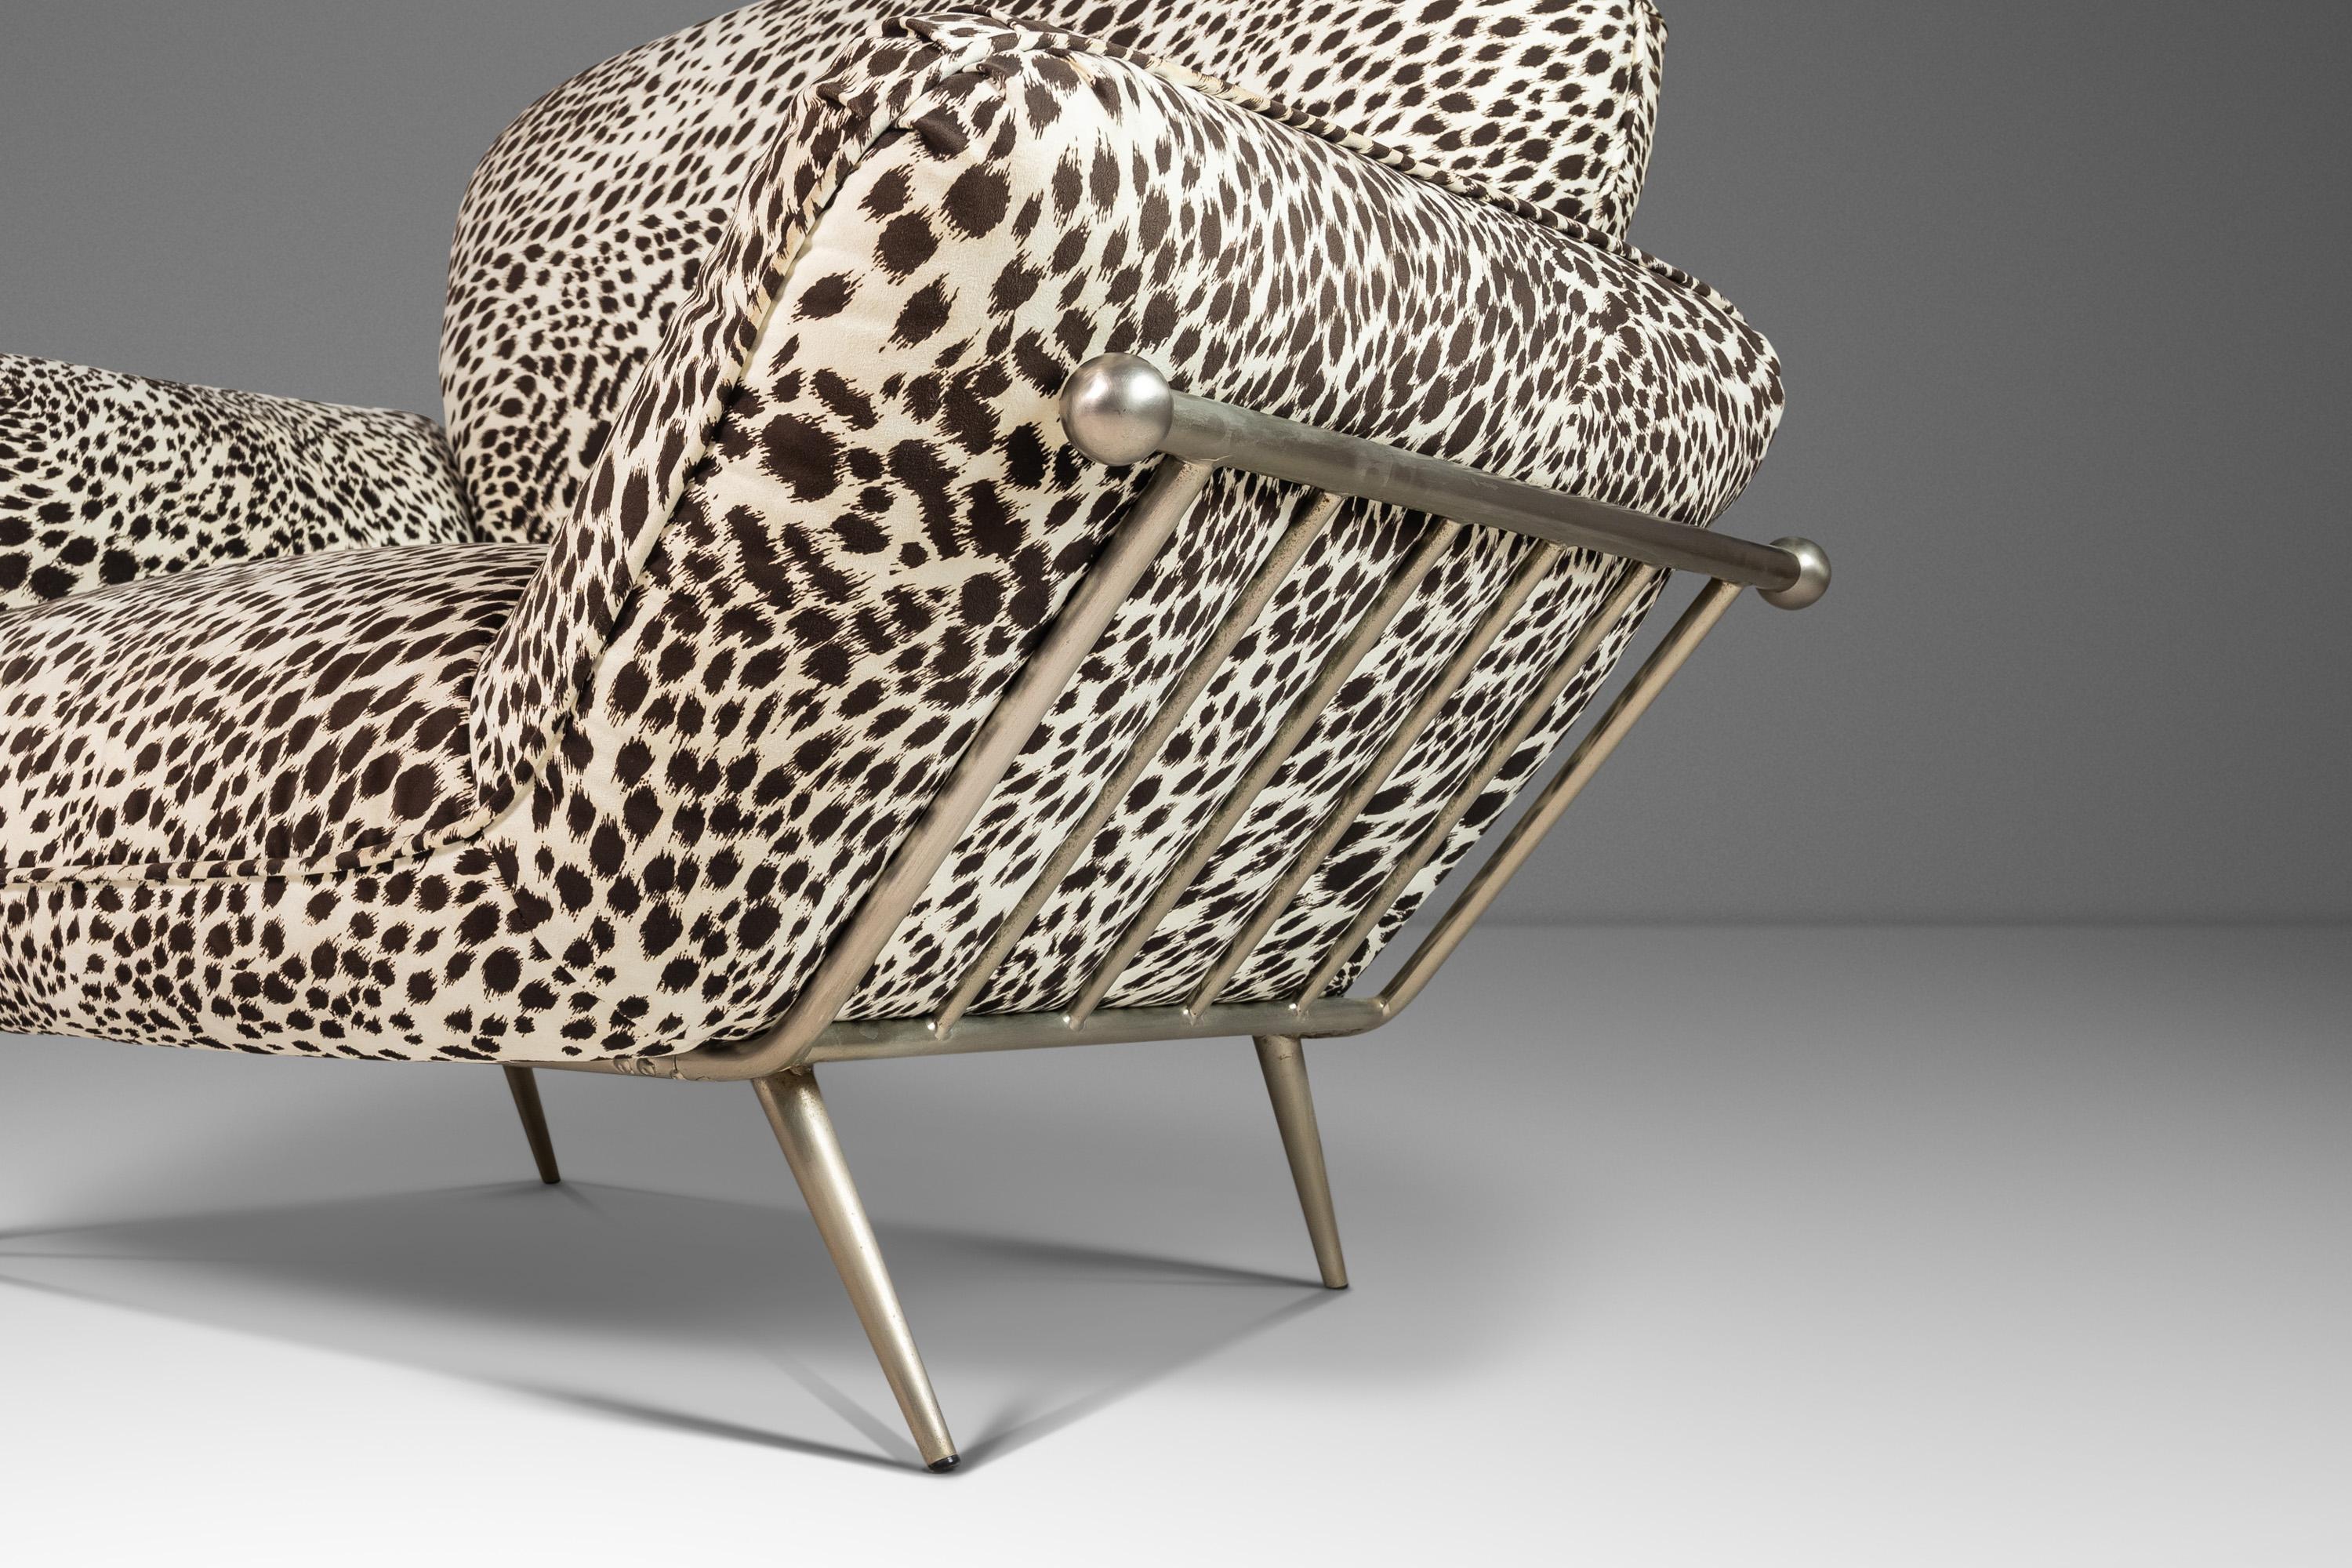 As rare as it is stylish this absolutely extraordinary lounge chair is truly unlike any other we've ever come across. In 100% original, vintage condition this phenomenal features a fabulous animal print on oversized cushions that are as comfortable